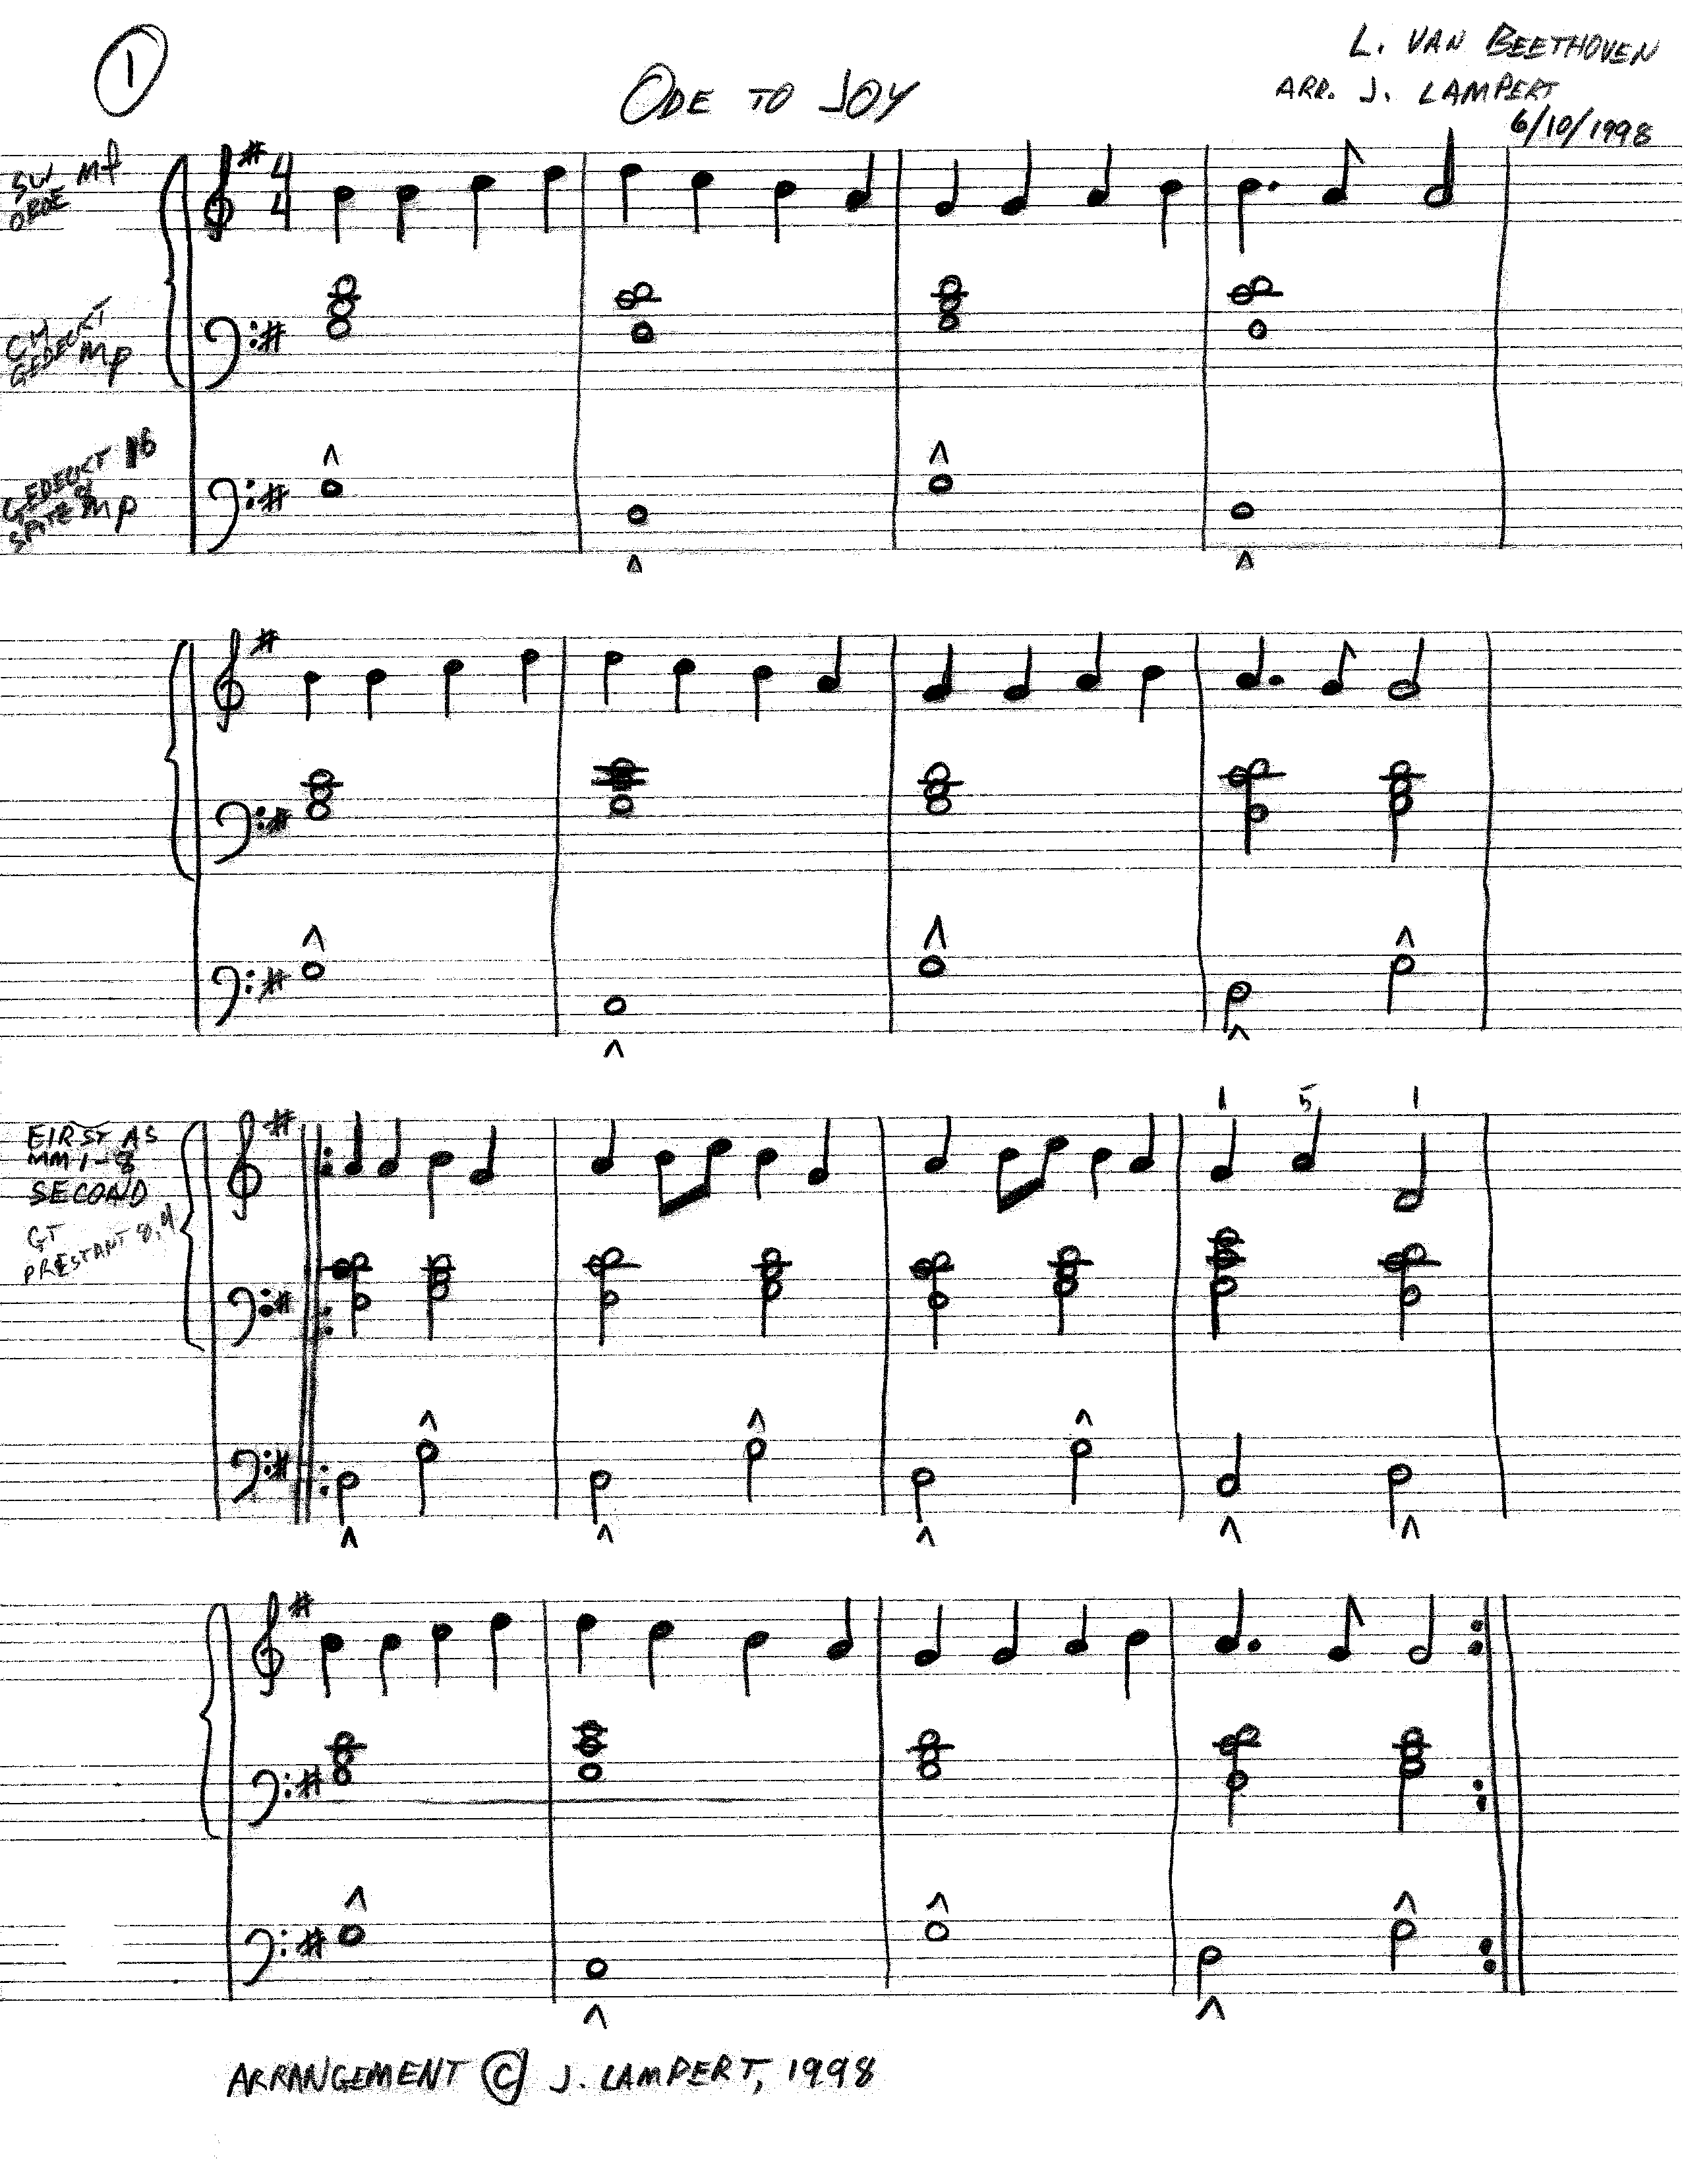 Page 1 of score